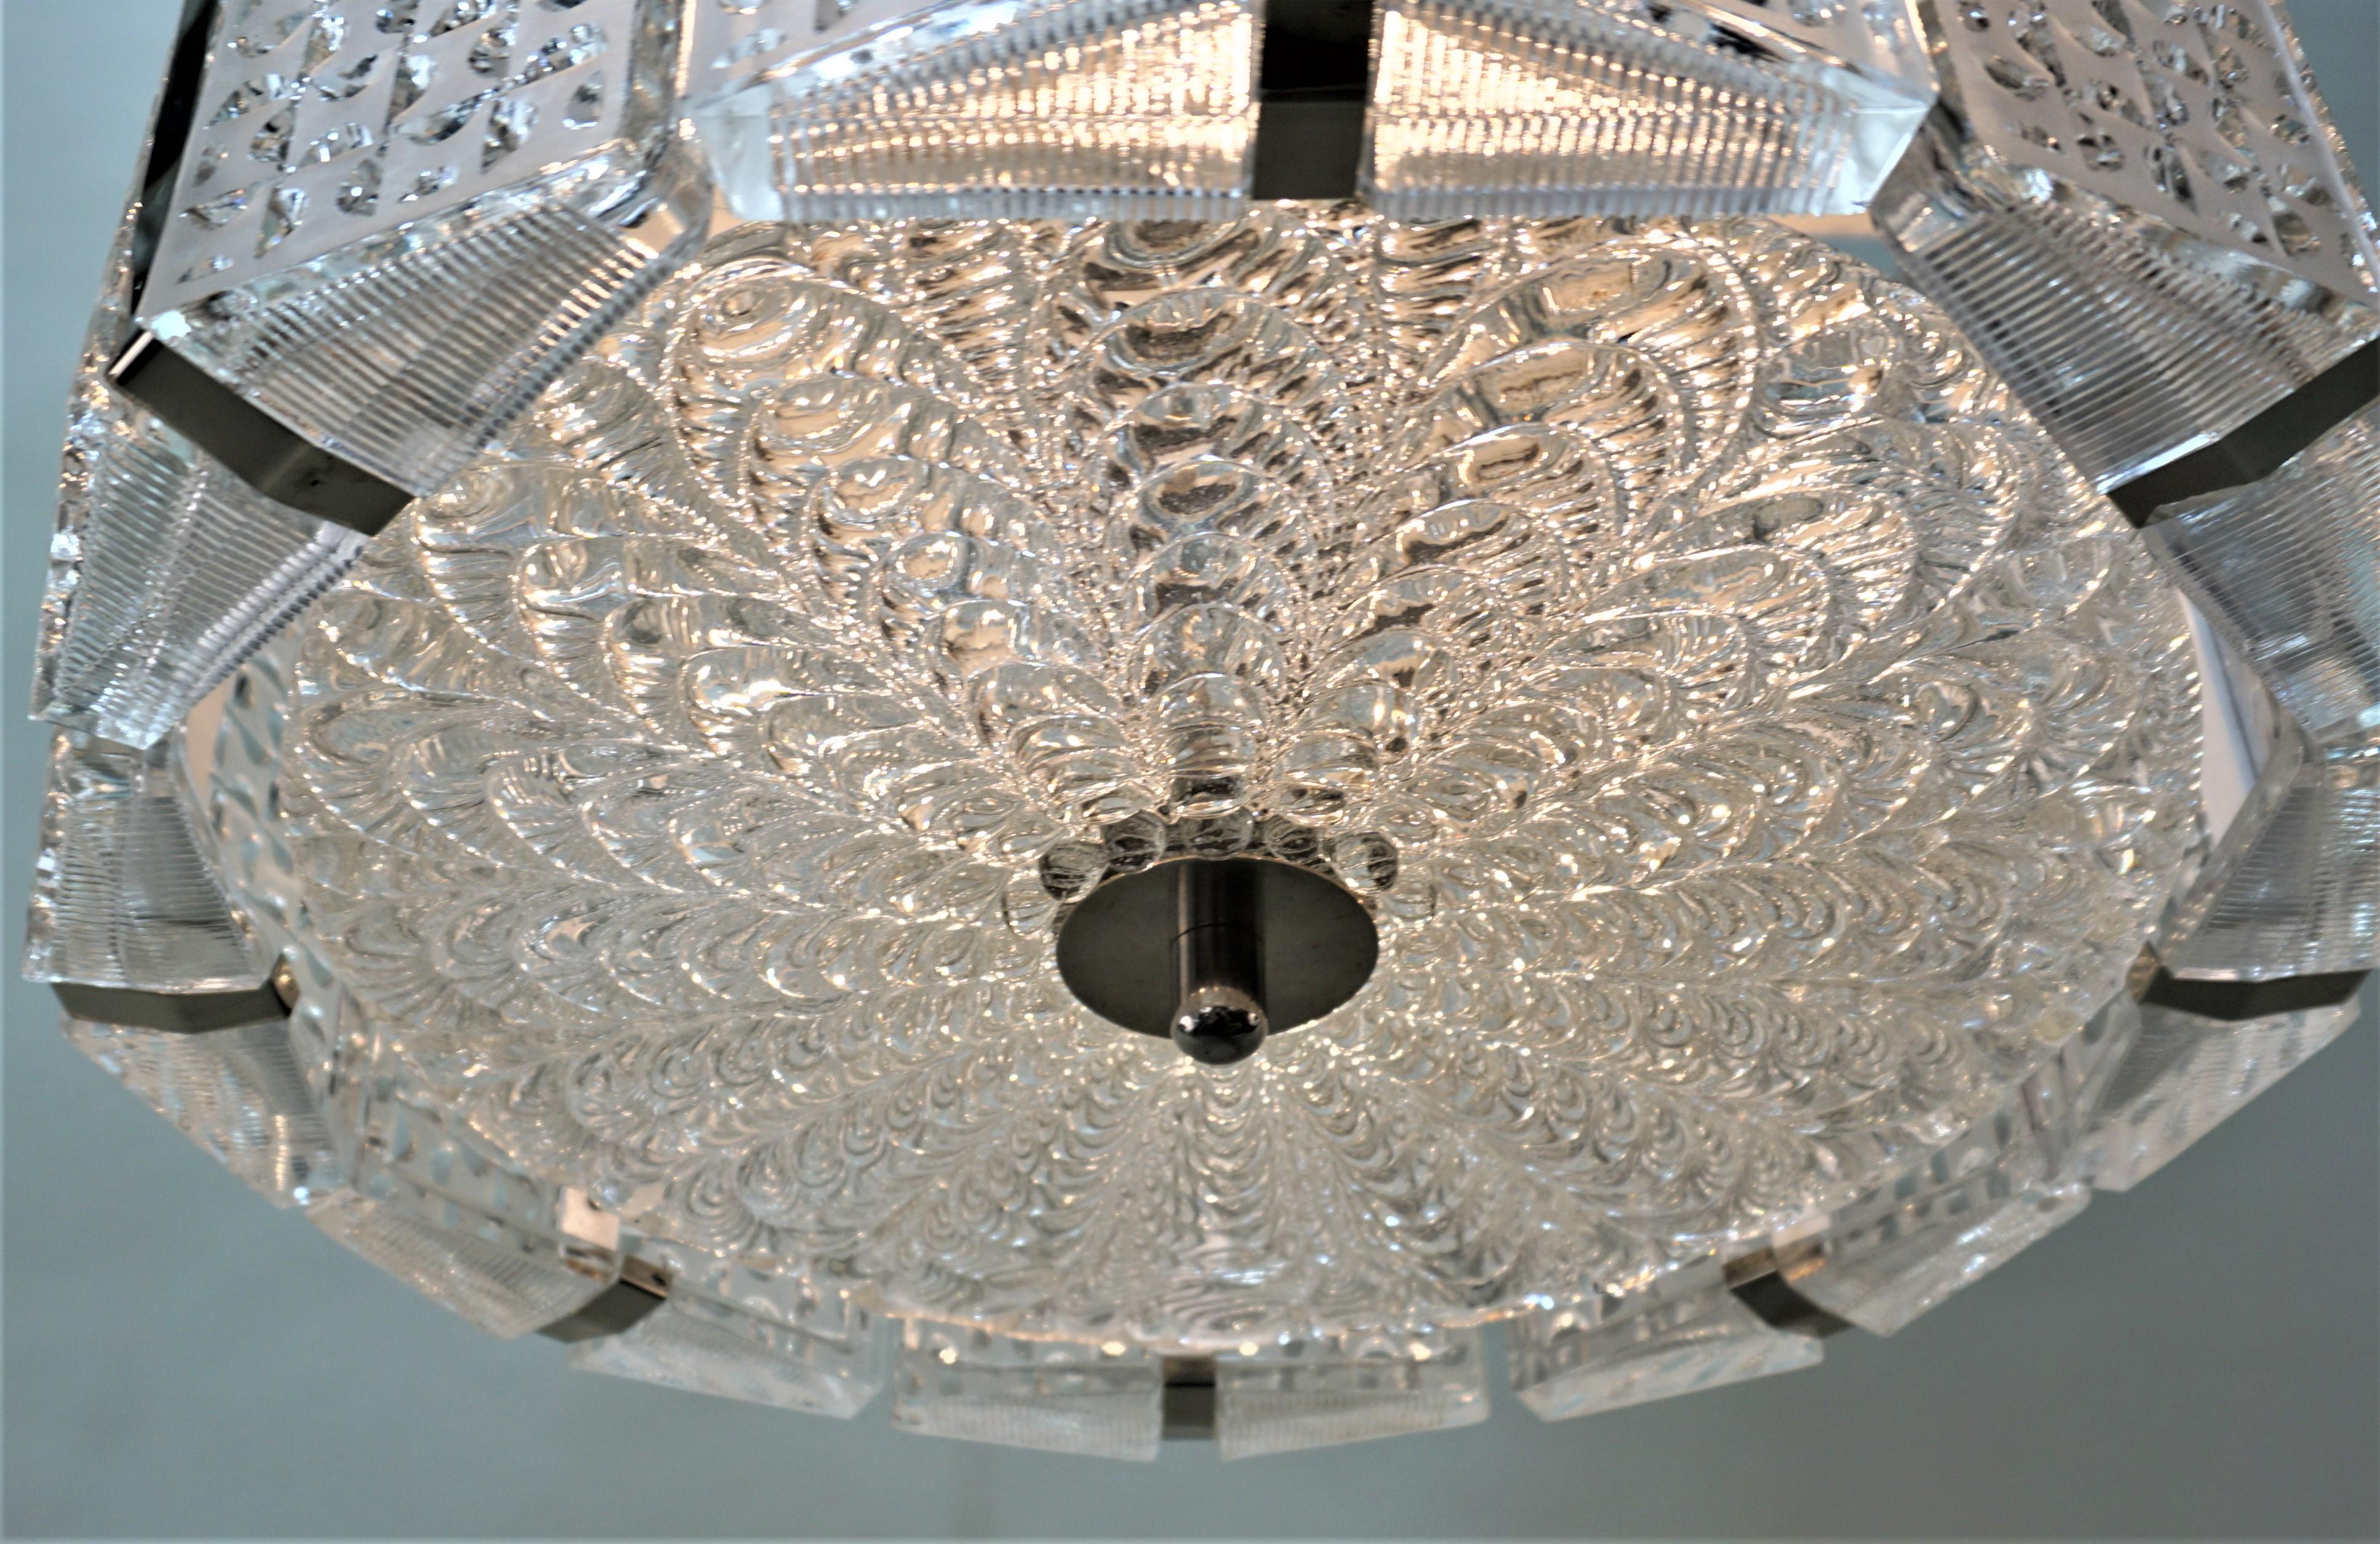 Eight texture clear glass side panels as well as center texture glass with nickel/chrome hardware chandelier.